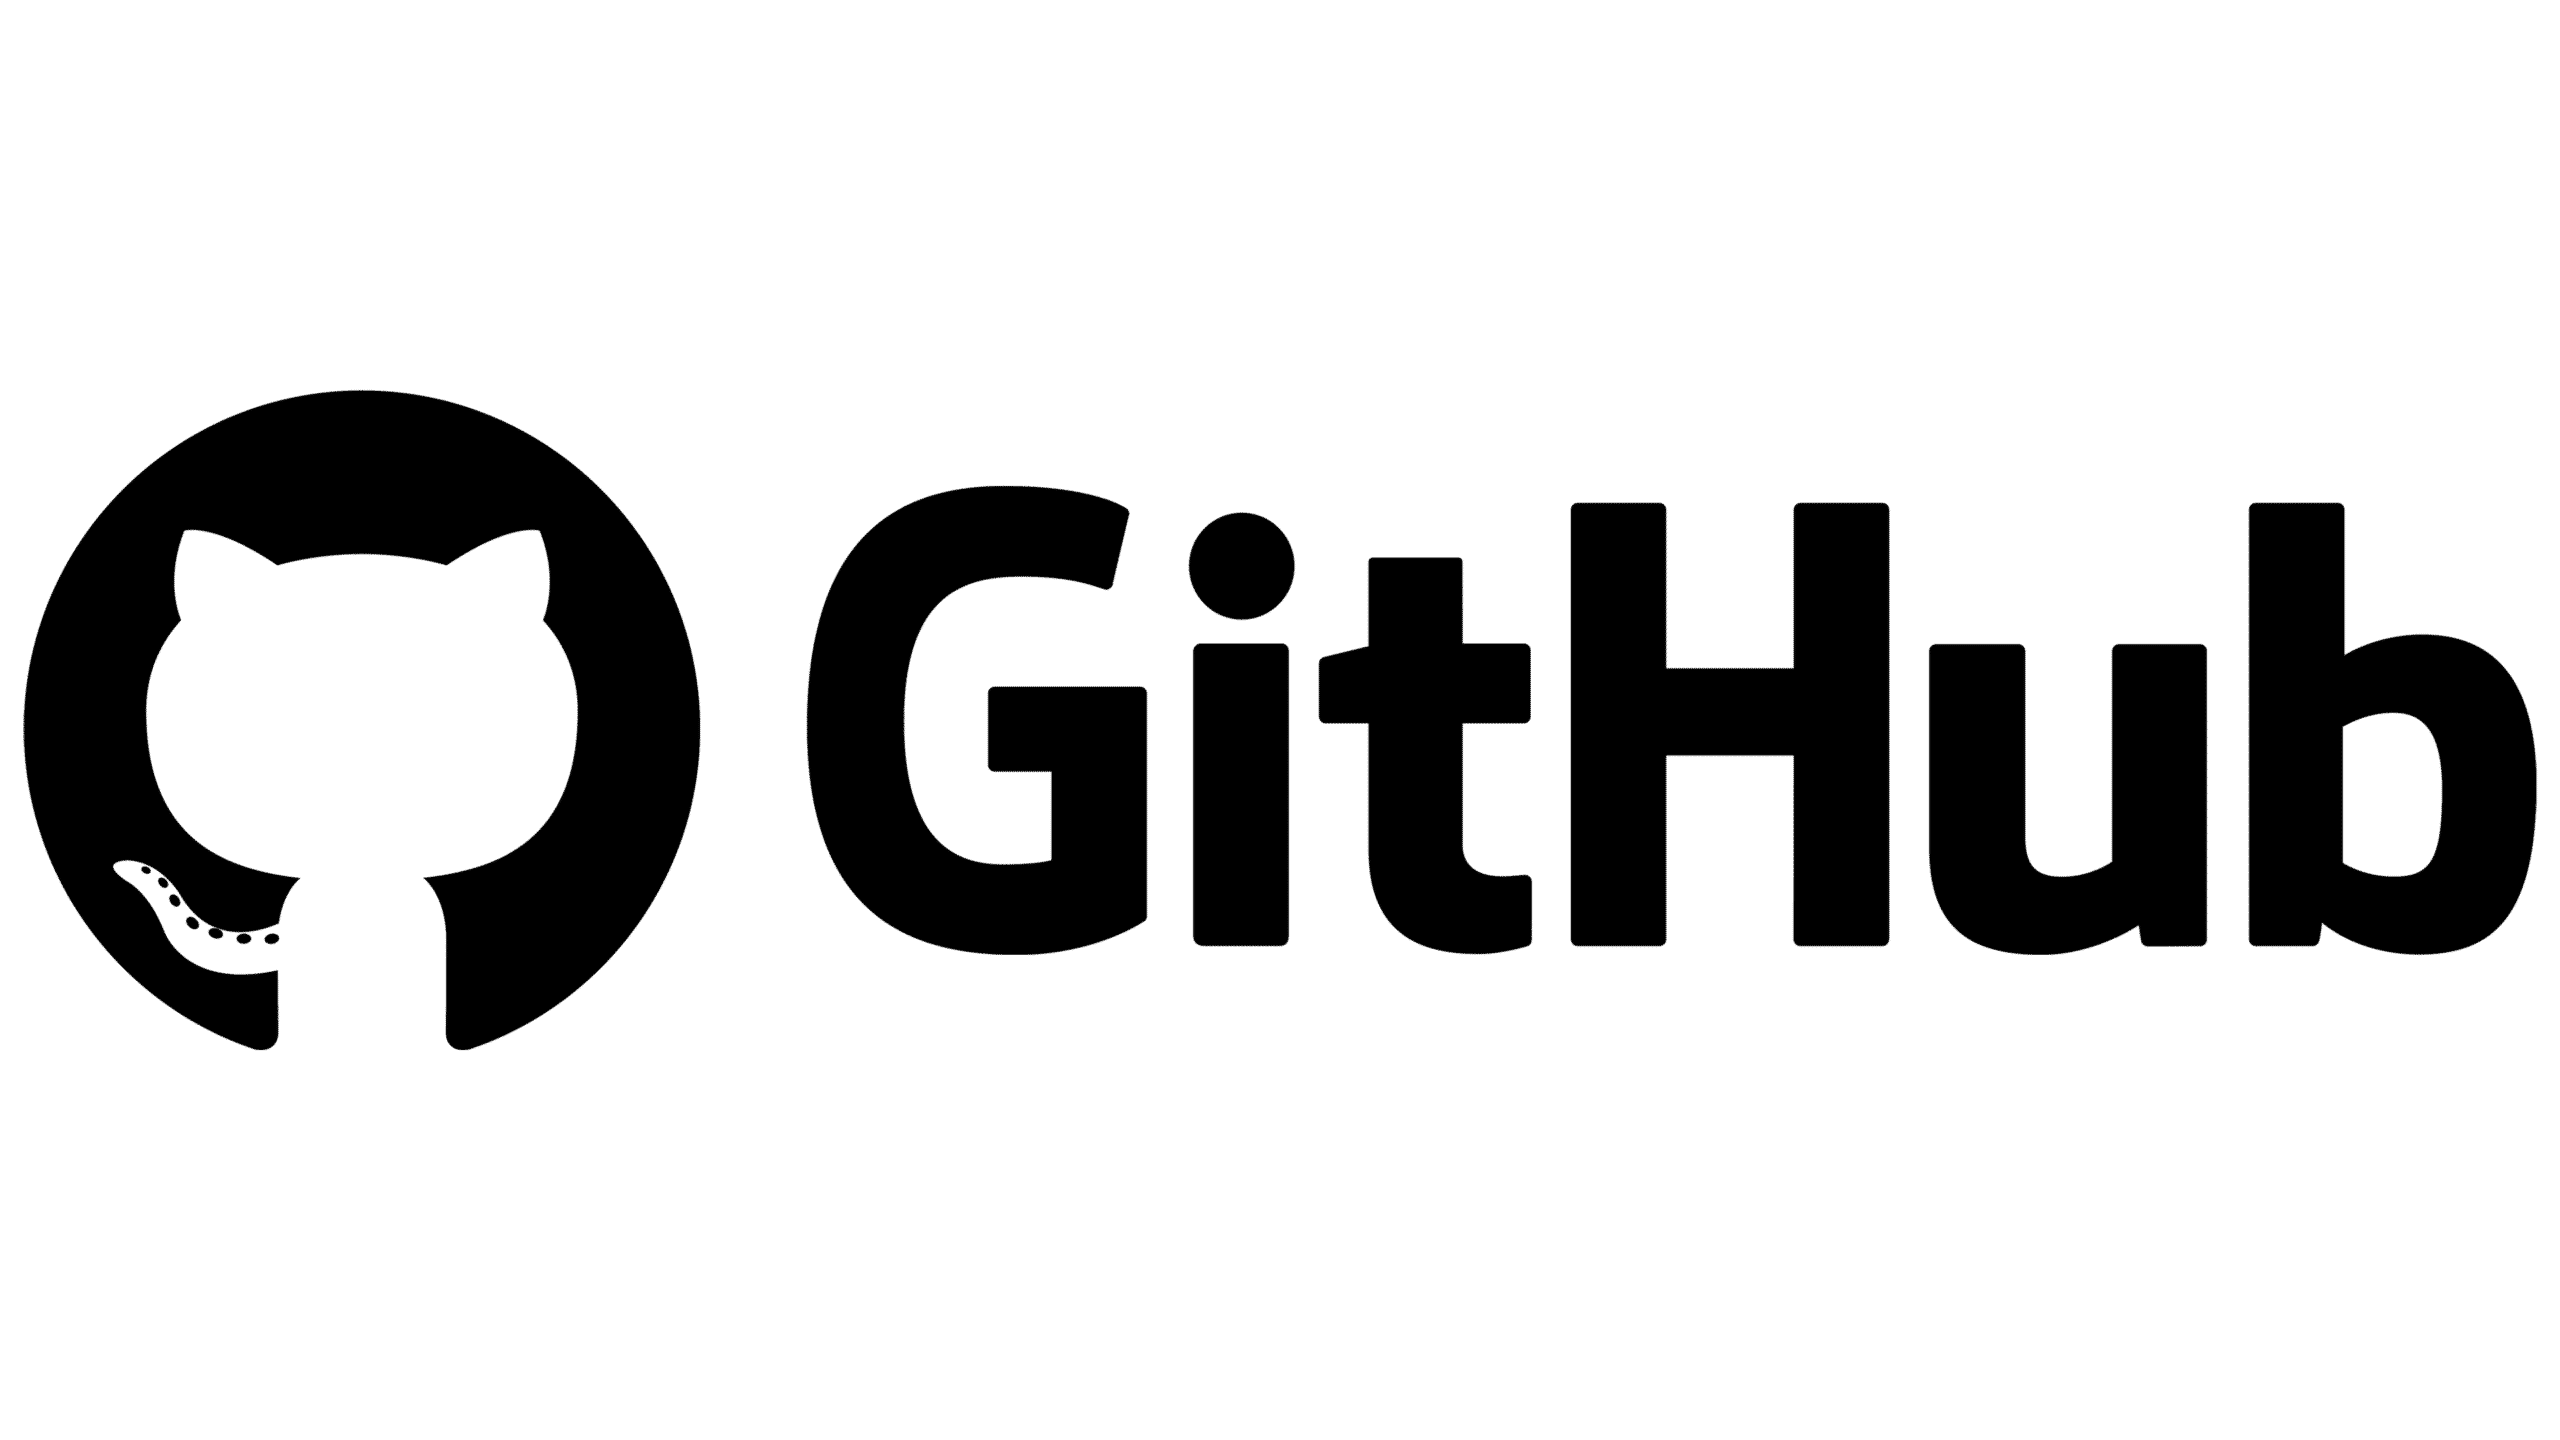 enterprises github repos are targeted through captured auth0 access tokens